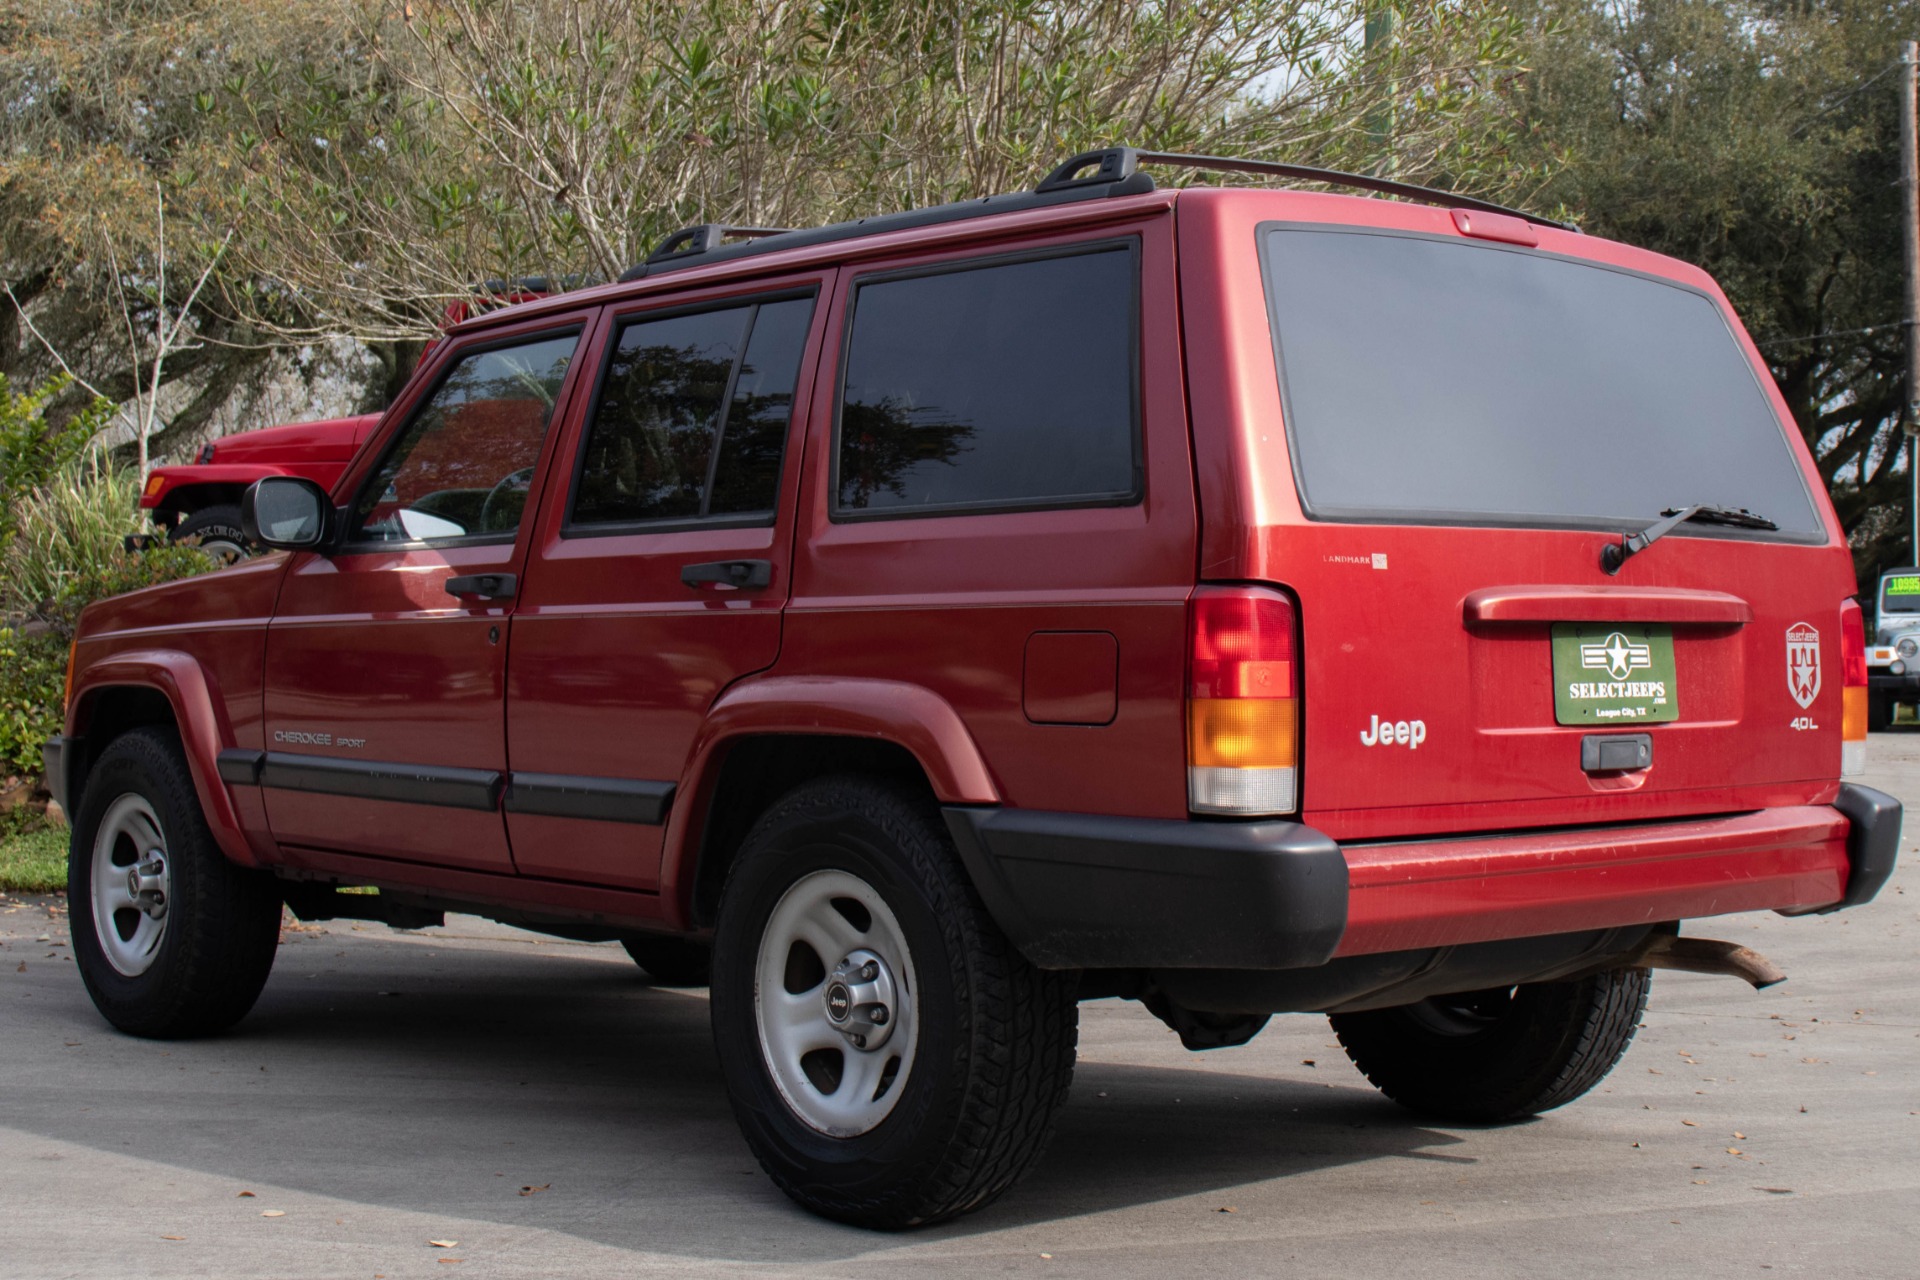 Used 1999 Jeep Cherokee Sport For Sale ($5,995) | Select ...